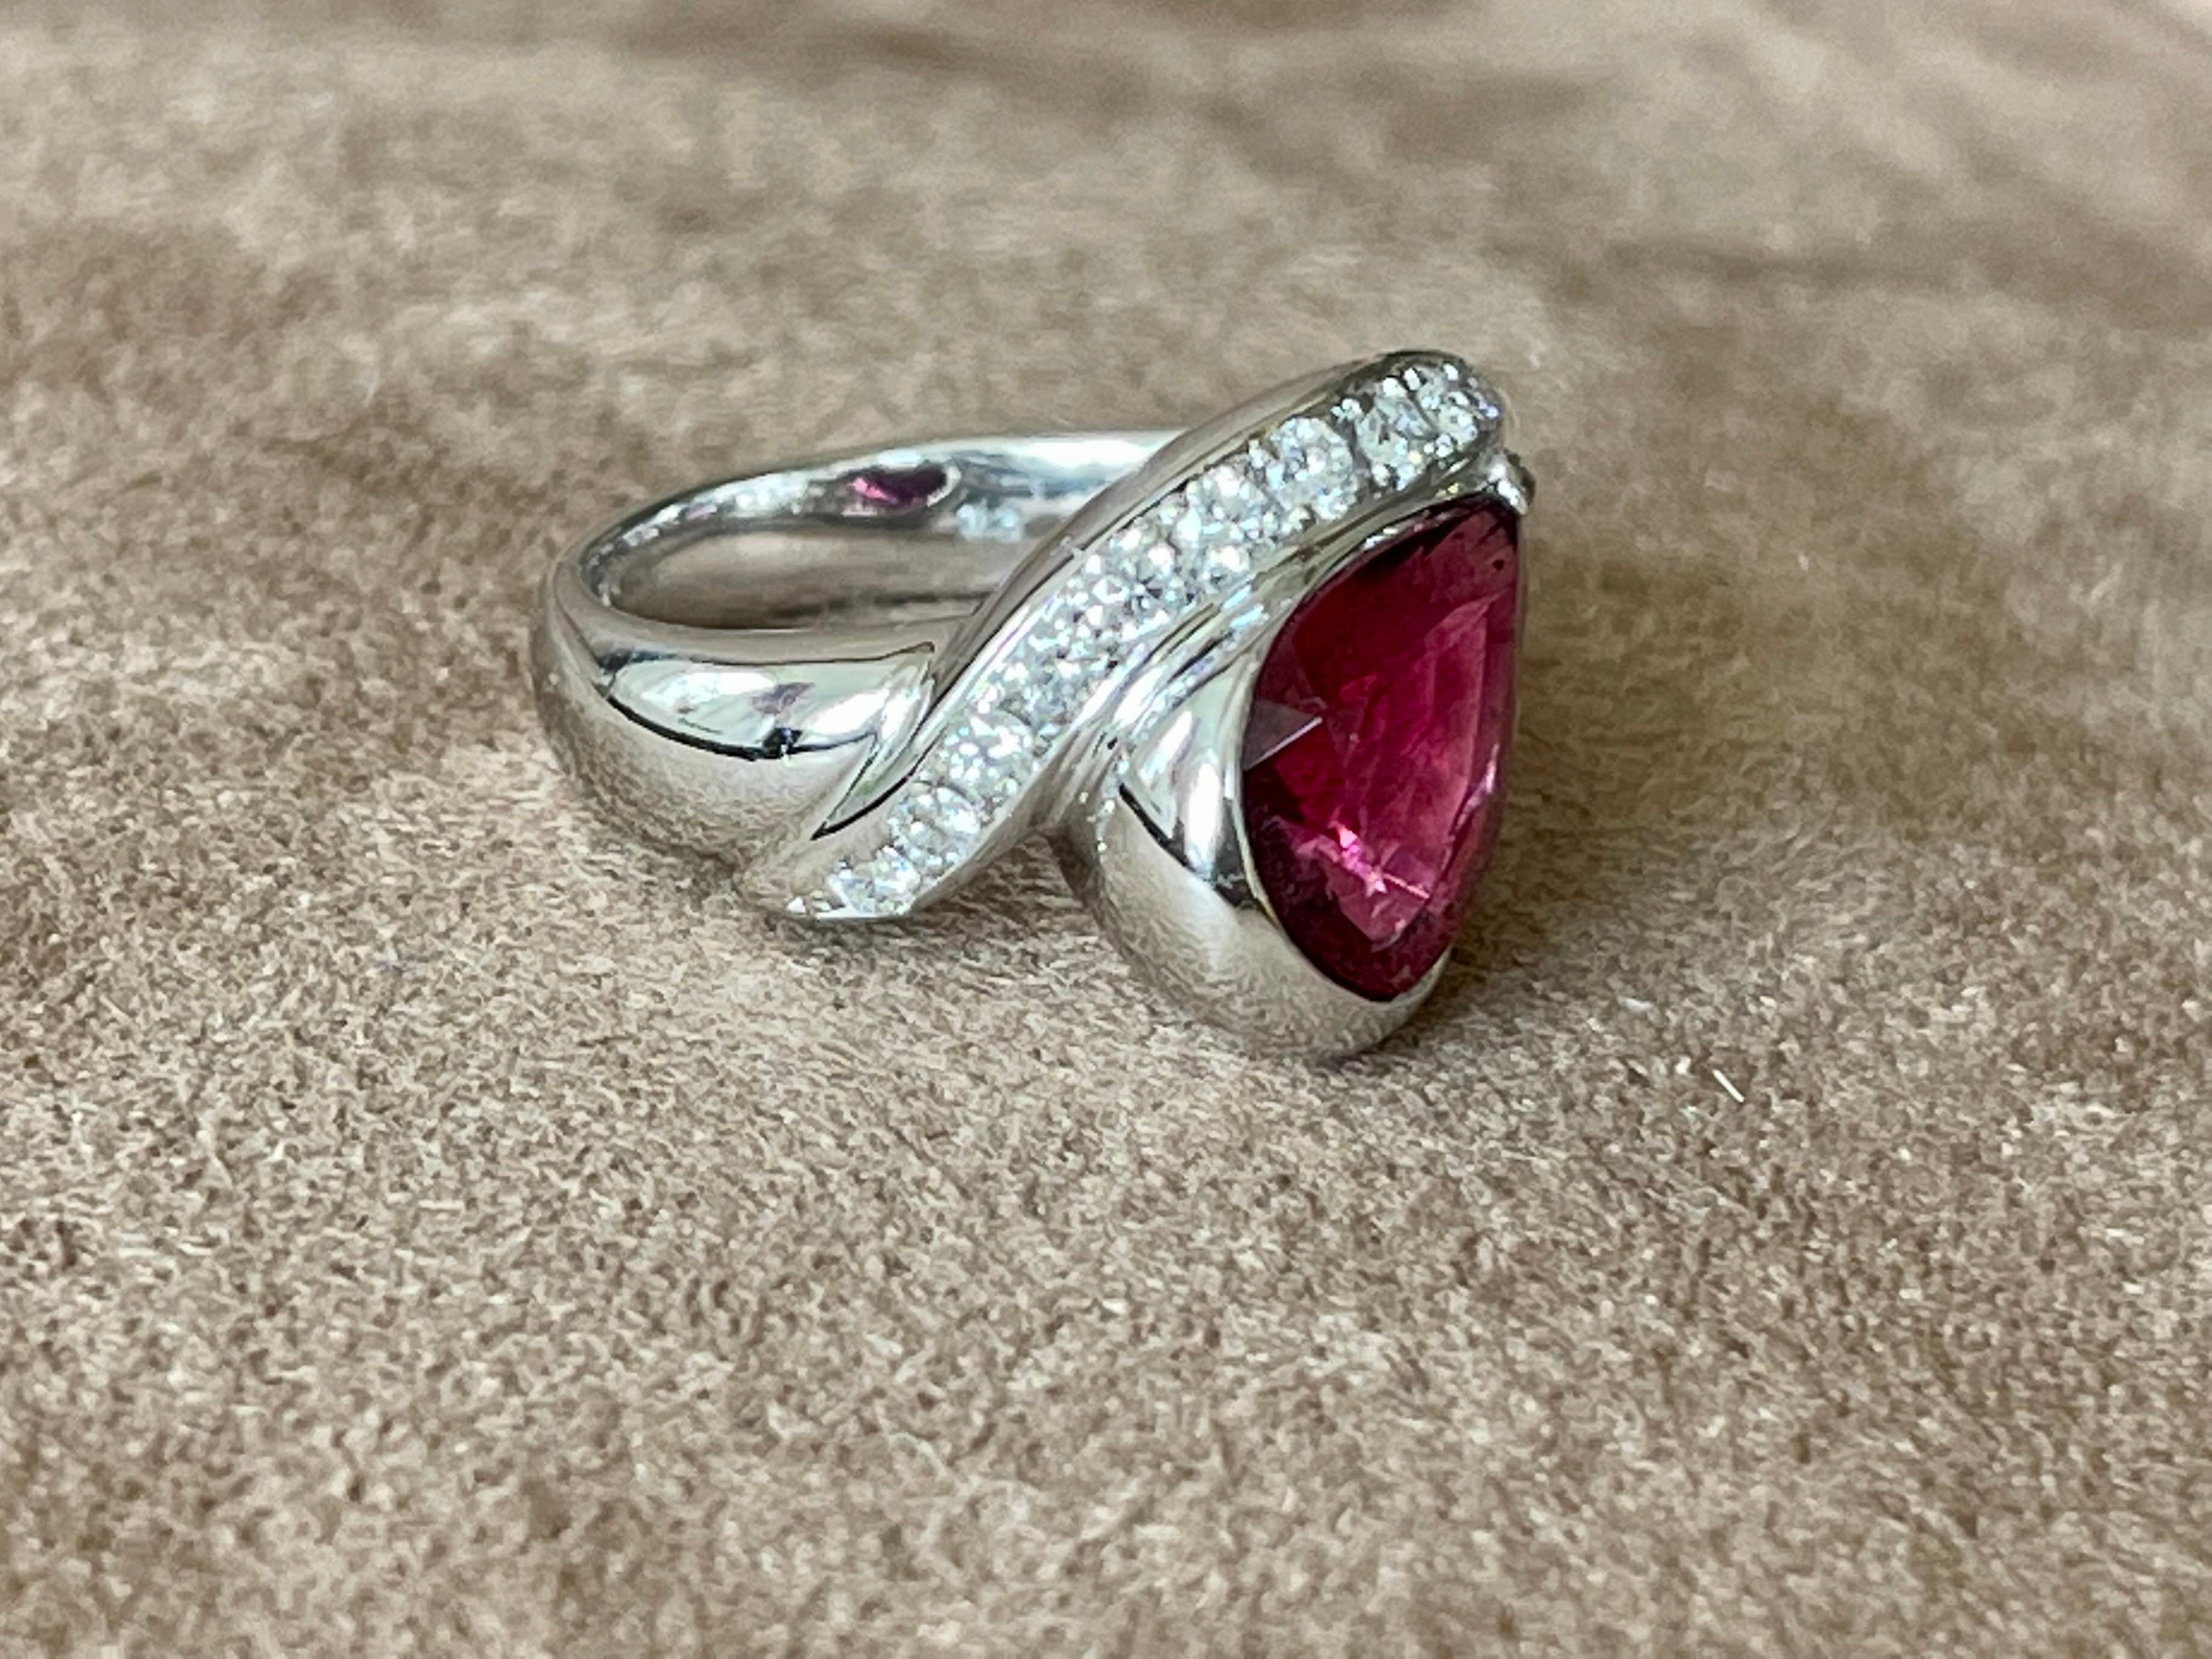 Modern Platinum Ring 900 featuring a lovely intense pear shape Rubelite weiging 3.01 ct and pavé set brilliant cut Diamonds weighing 0.45 ct. 
The ring size is currently a swiss 53/13 American Ring size 6 1/2, but can easily be resized. The ring is